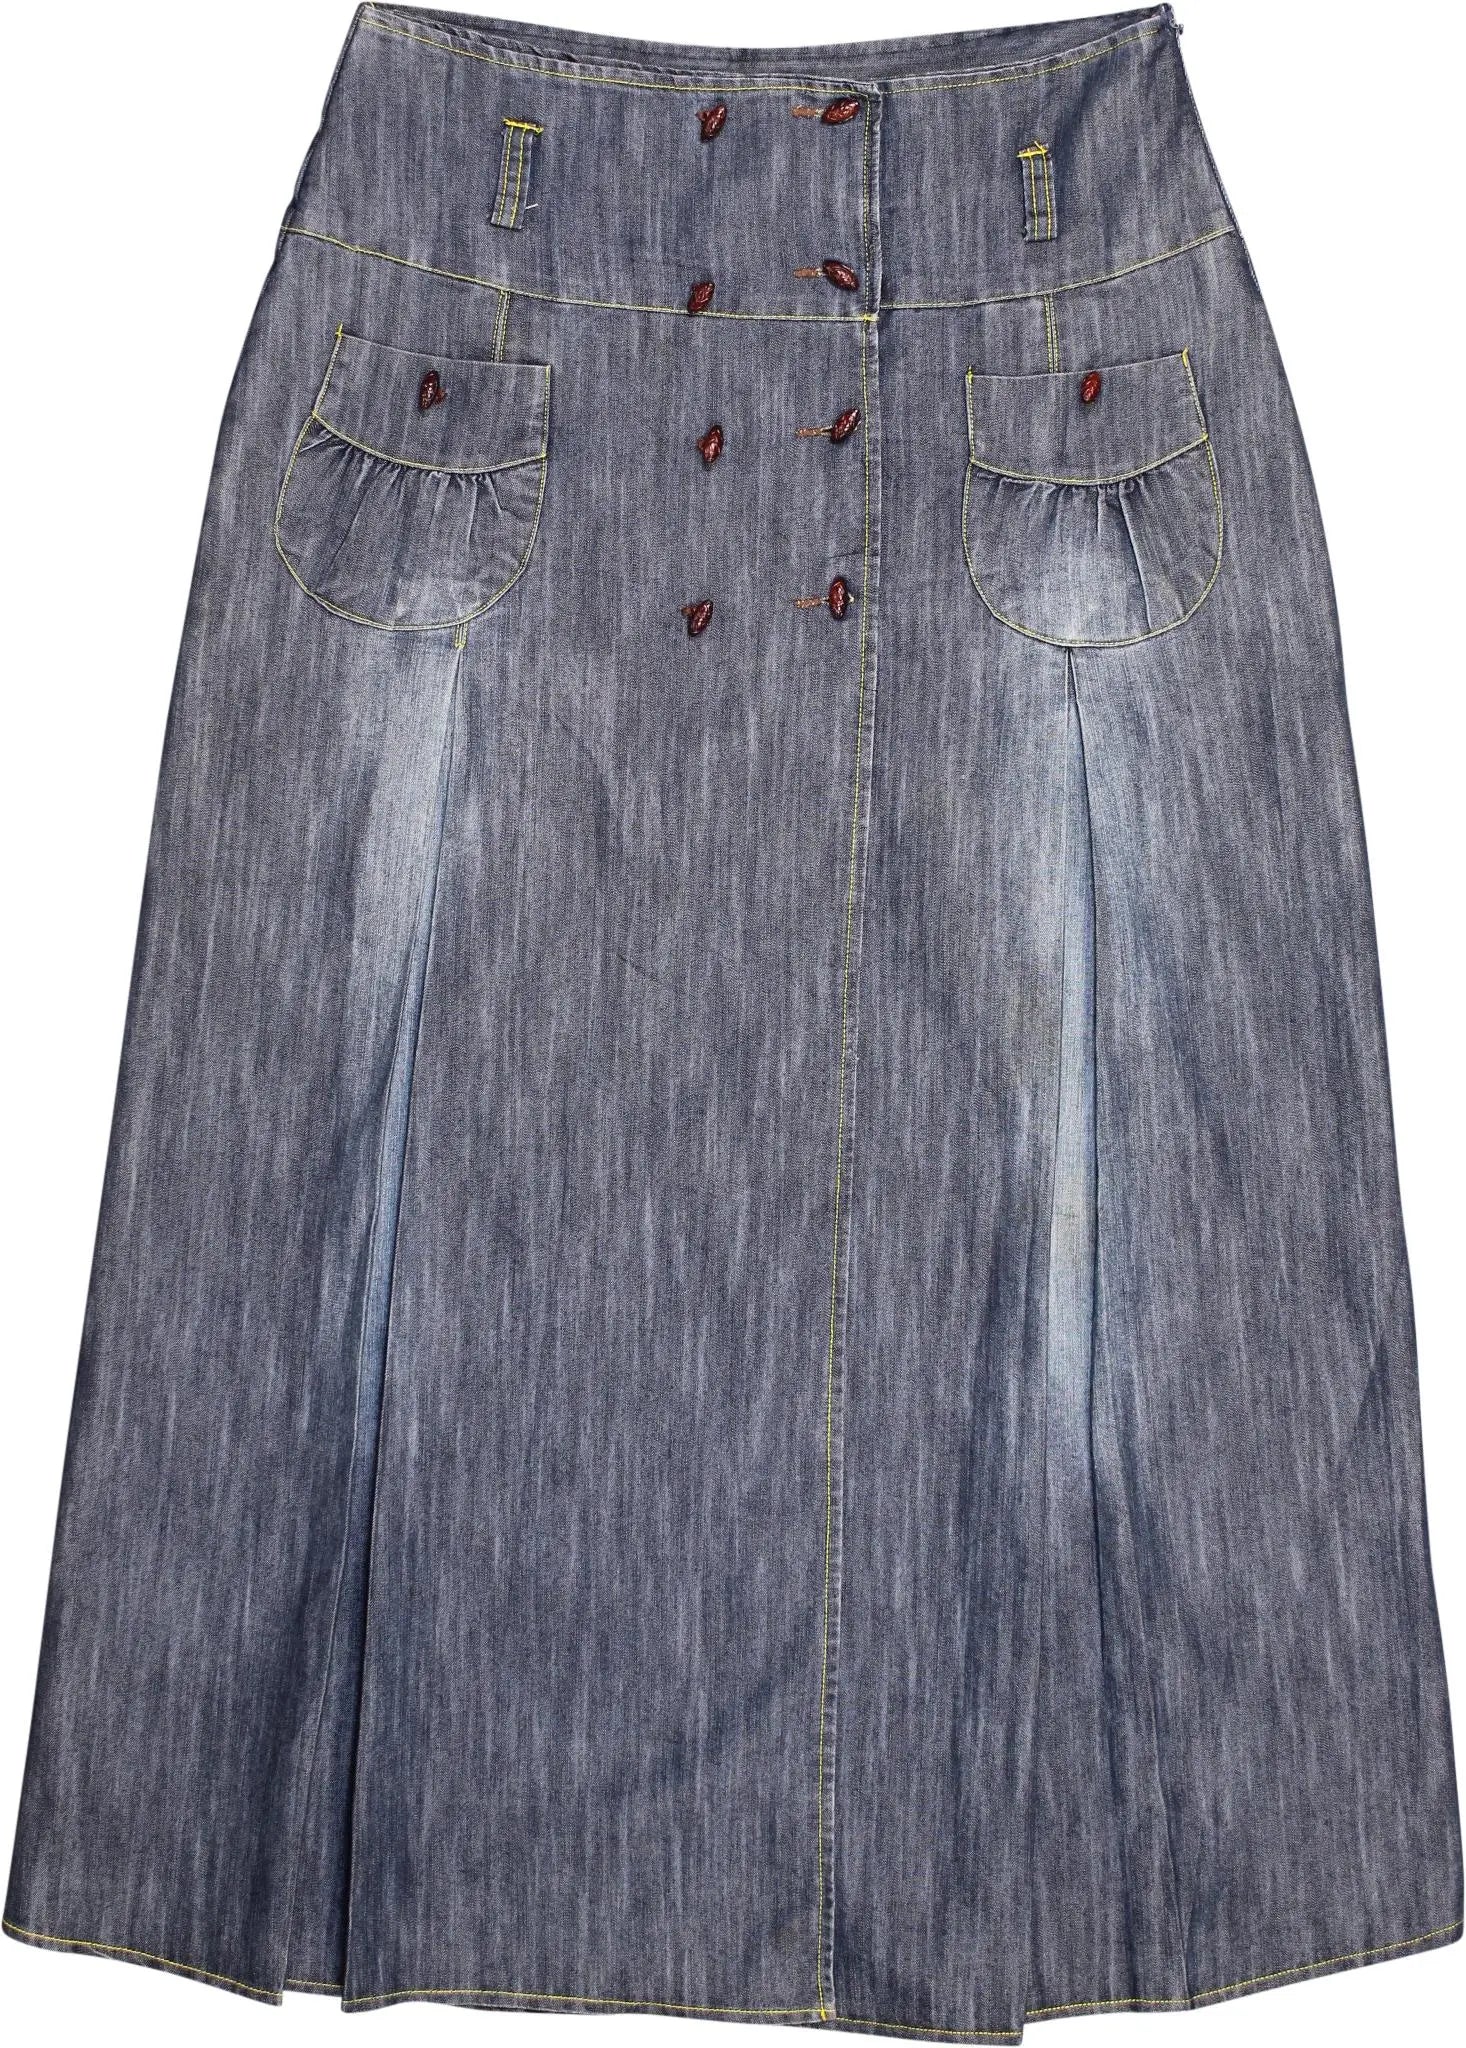 Unknown - Long Denim Skirt- ThriftTale.com - Vintage and second handclothing